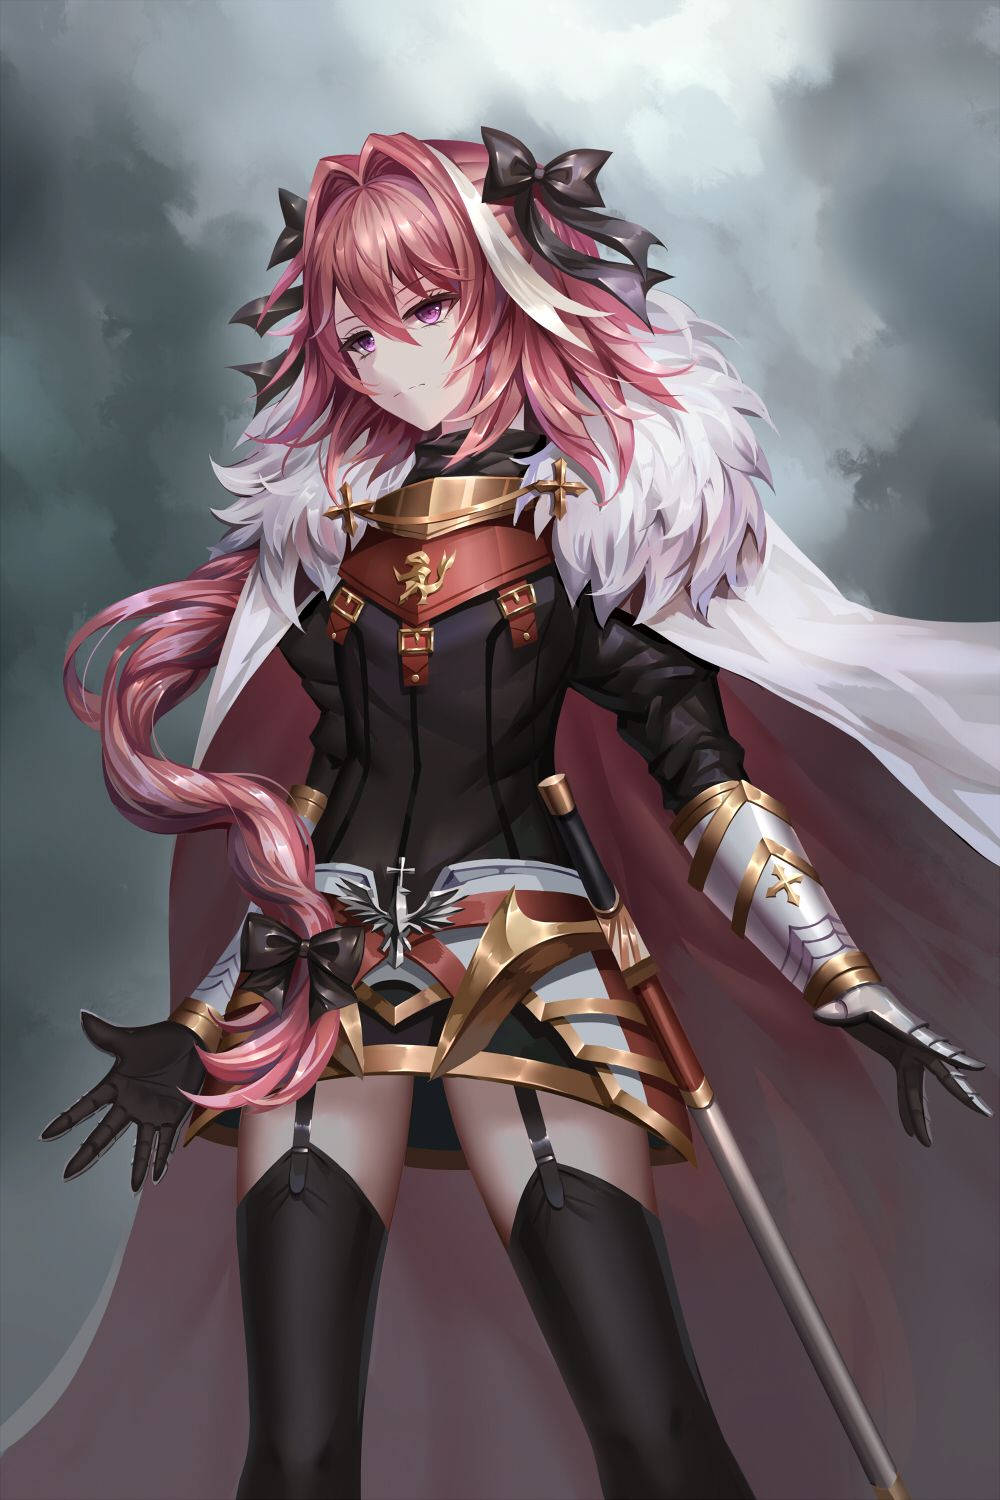 Wallpaper ID: 106958 / Astolfo (Fate/Apocrypha), Rider of Black  (Fate/Apocrypha), Fate/Apocrypha, anime, anime boys, Fate Series free  download